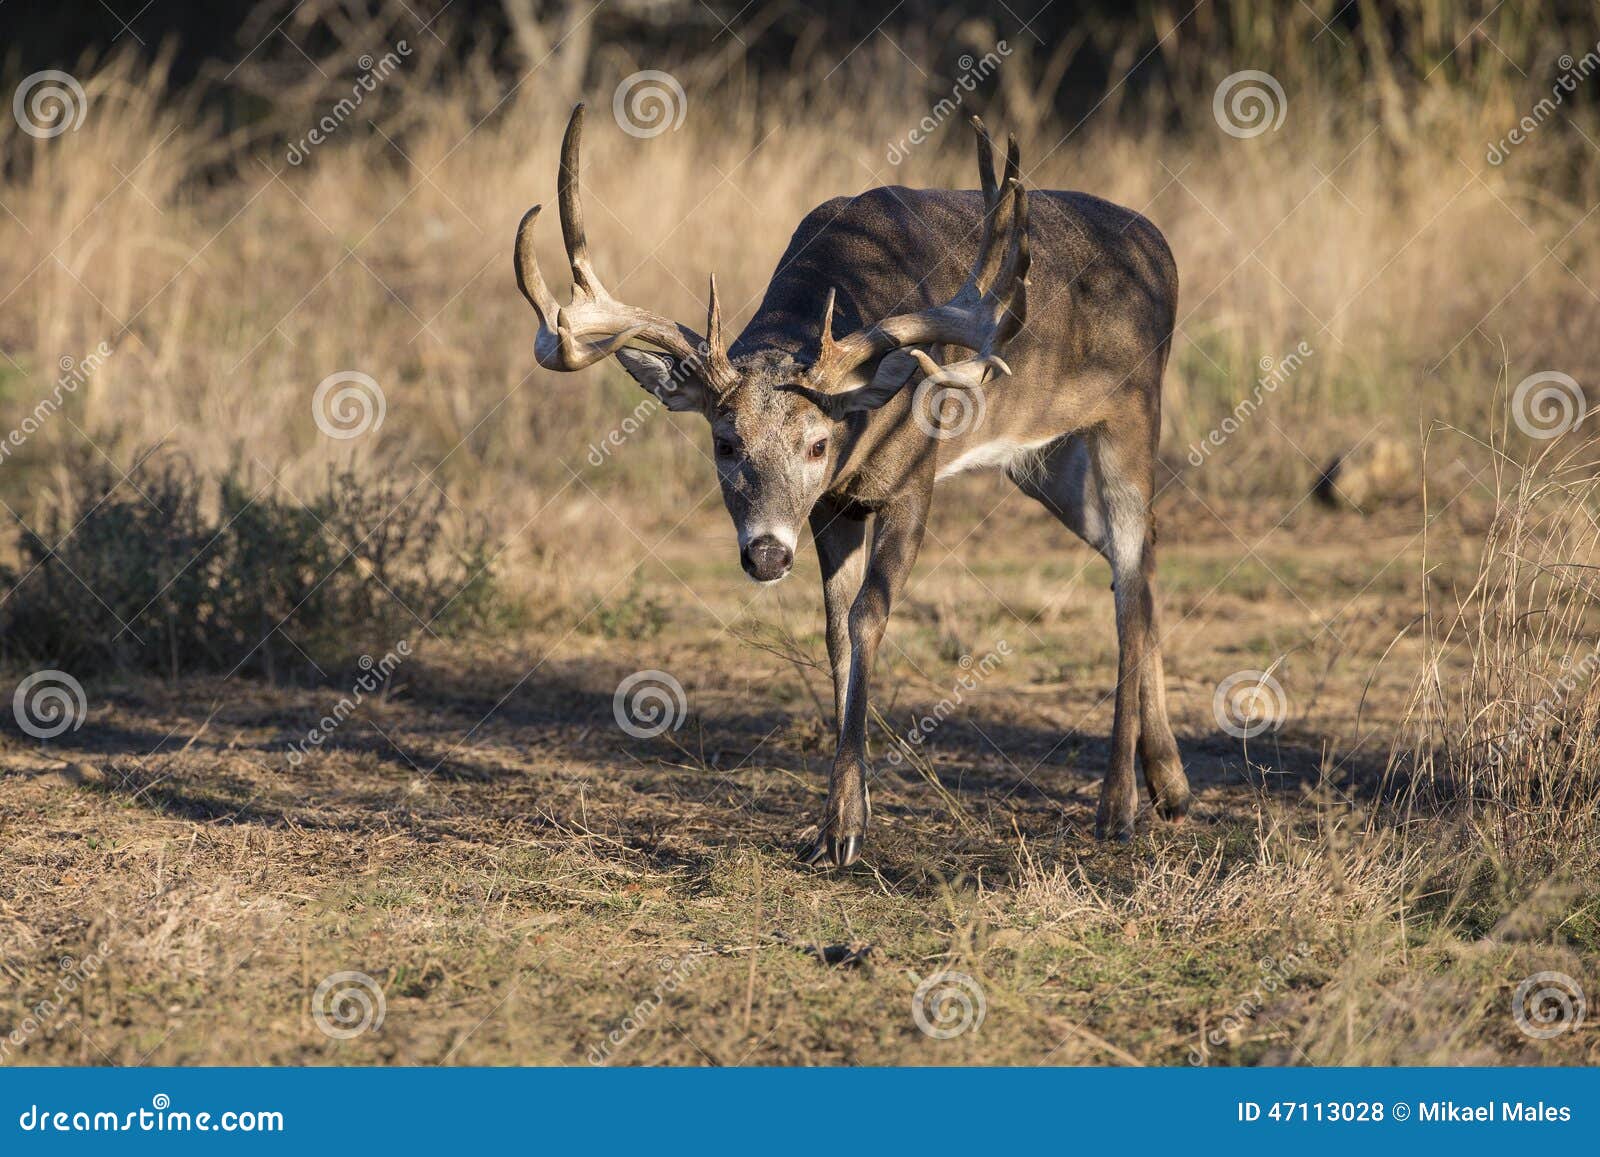 wide racked whitetail buck in trail of doe